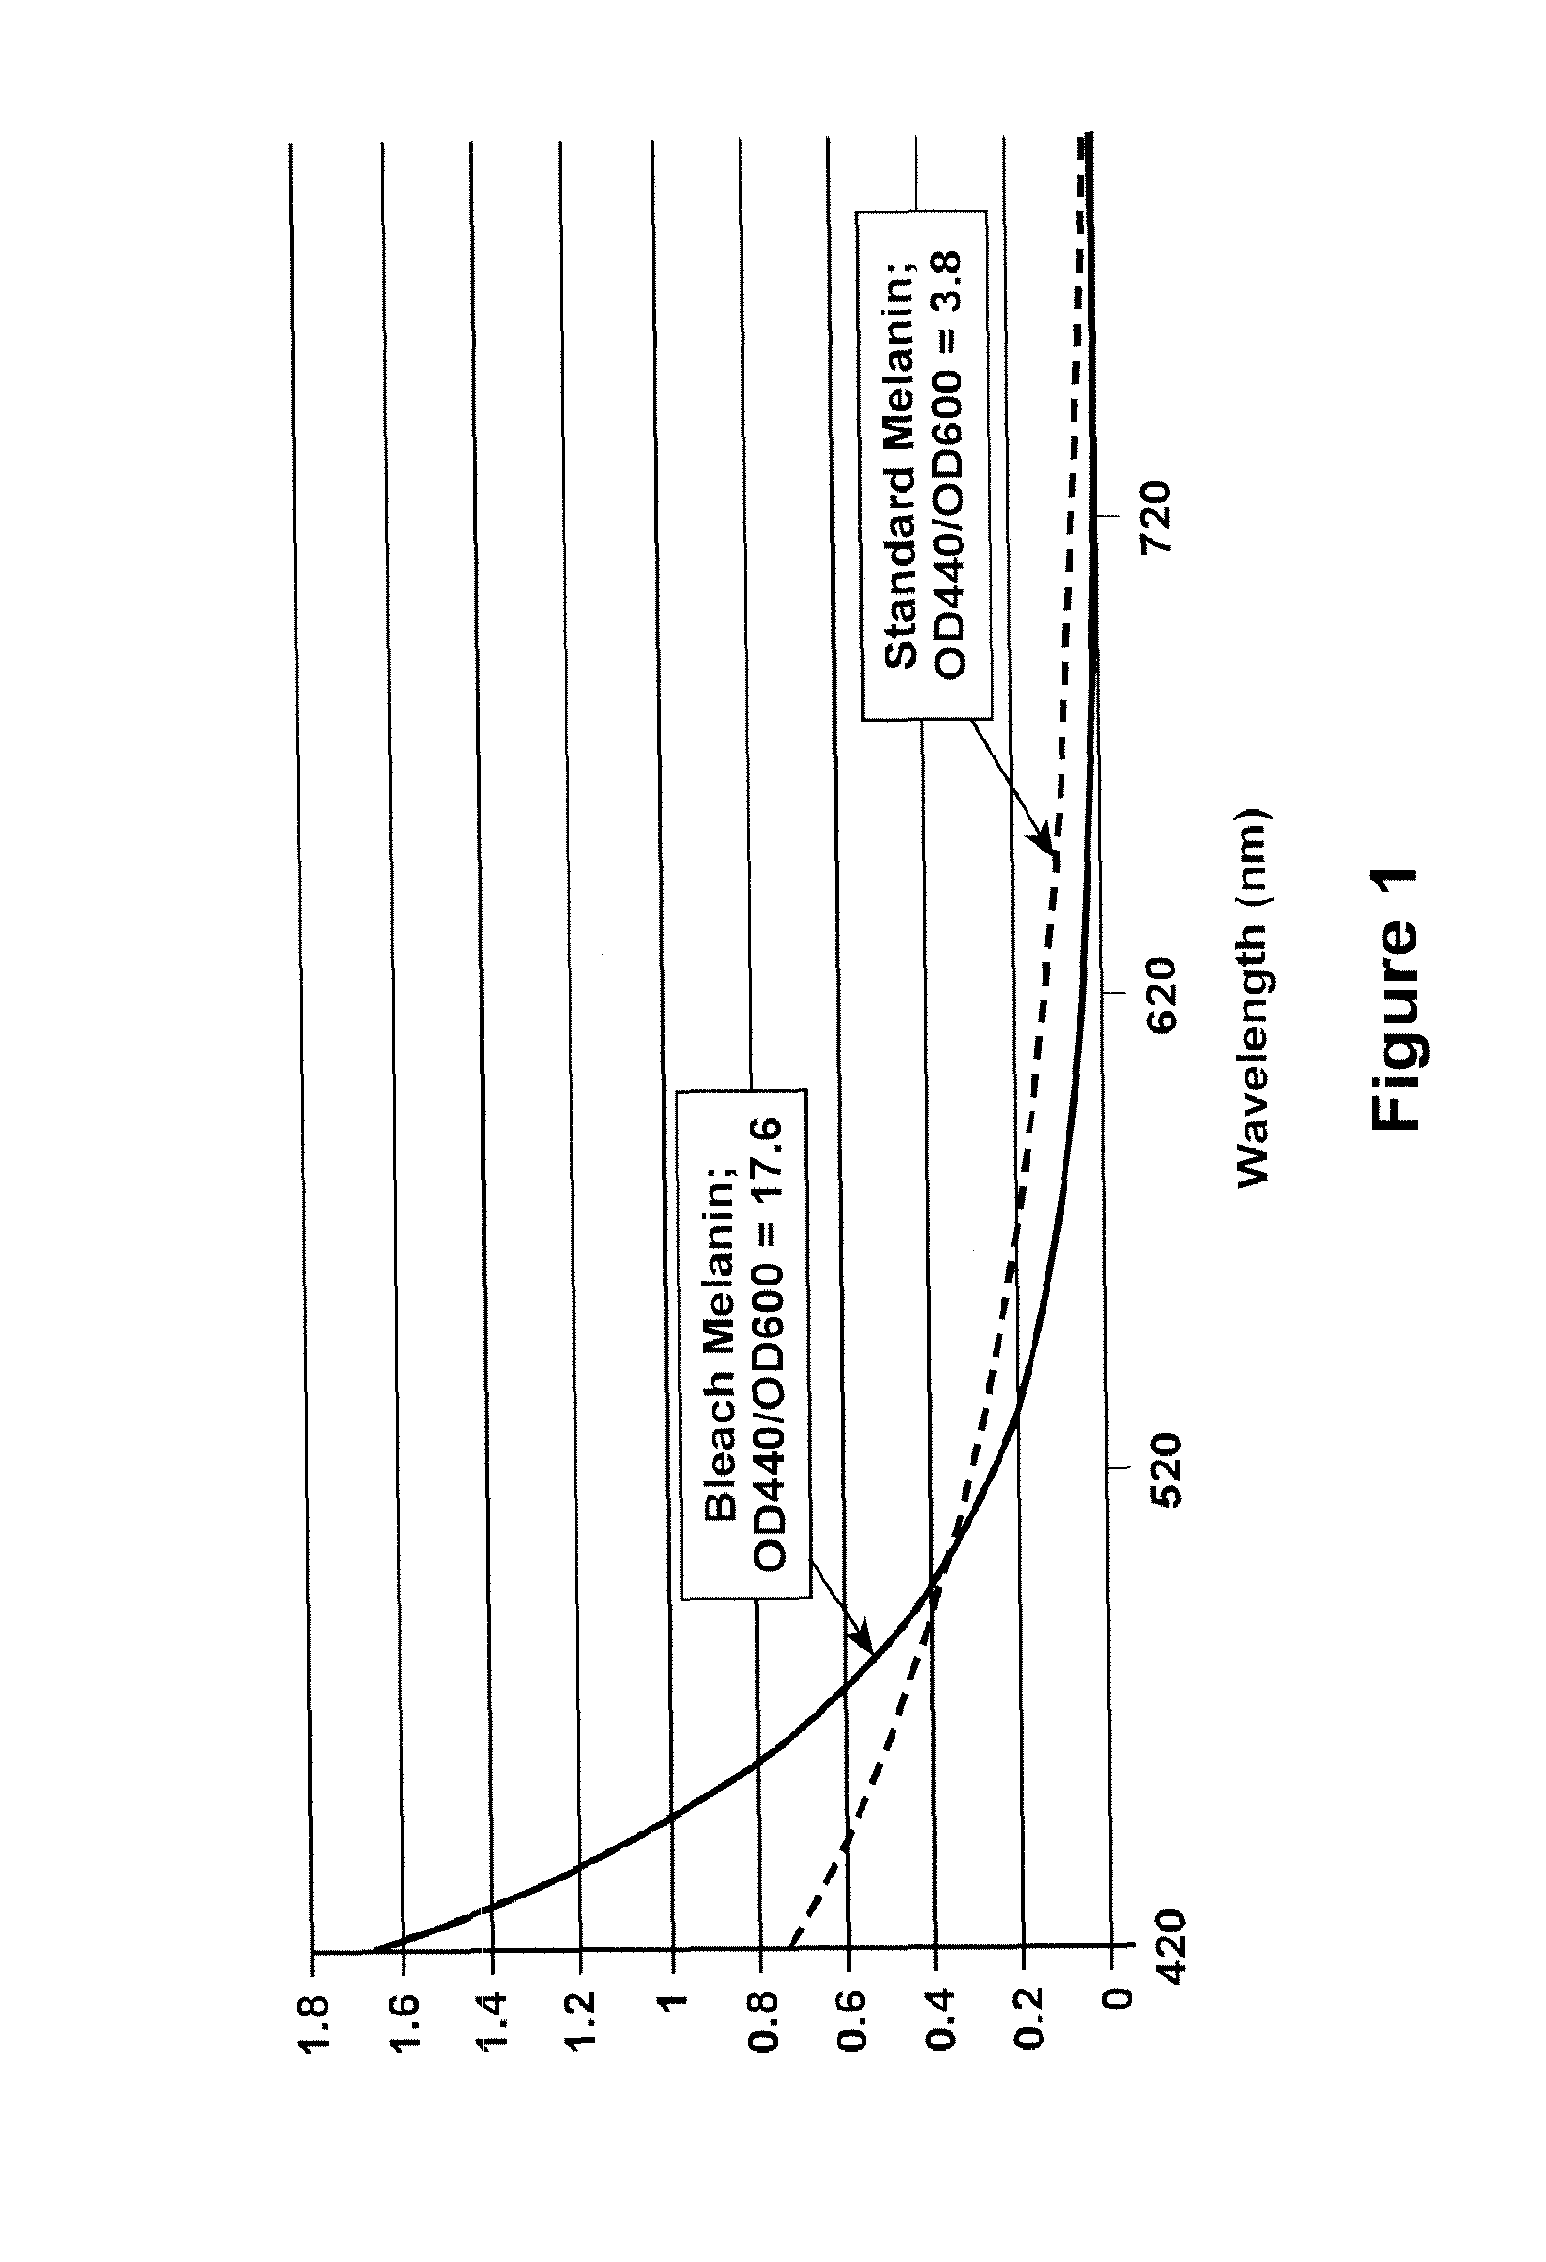 Compound, Composition, and Method for Protecting Skin from High Energy Visible Light